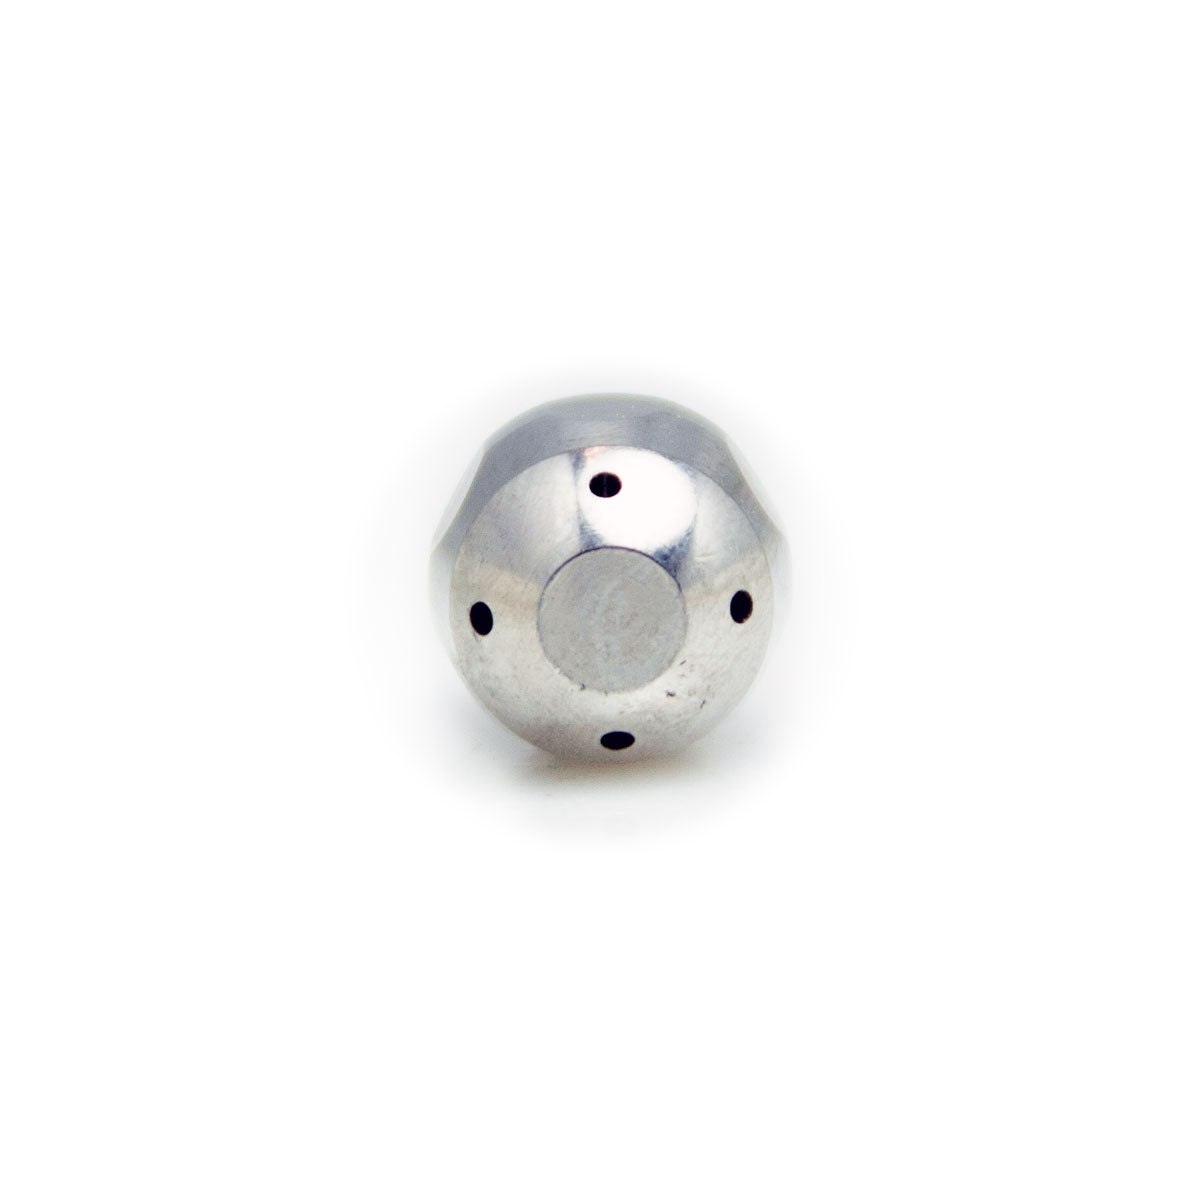 4 Hole 1.2 mm Steam Tip for No Burn Arm